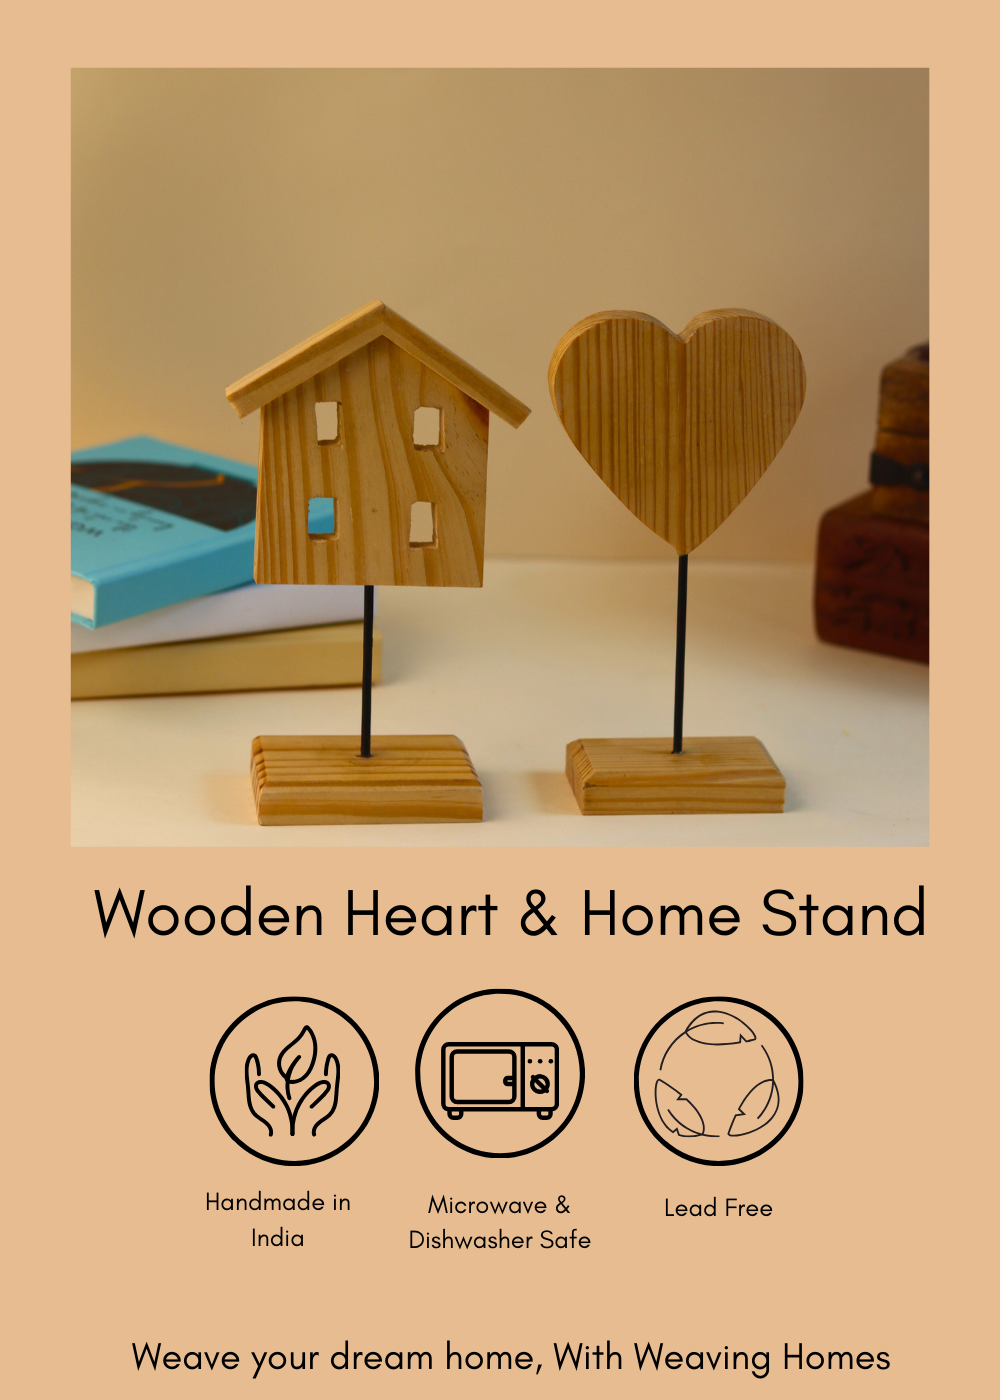 wooden heart & hut stand handmade in india